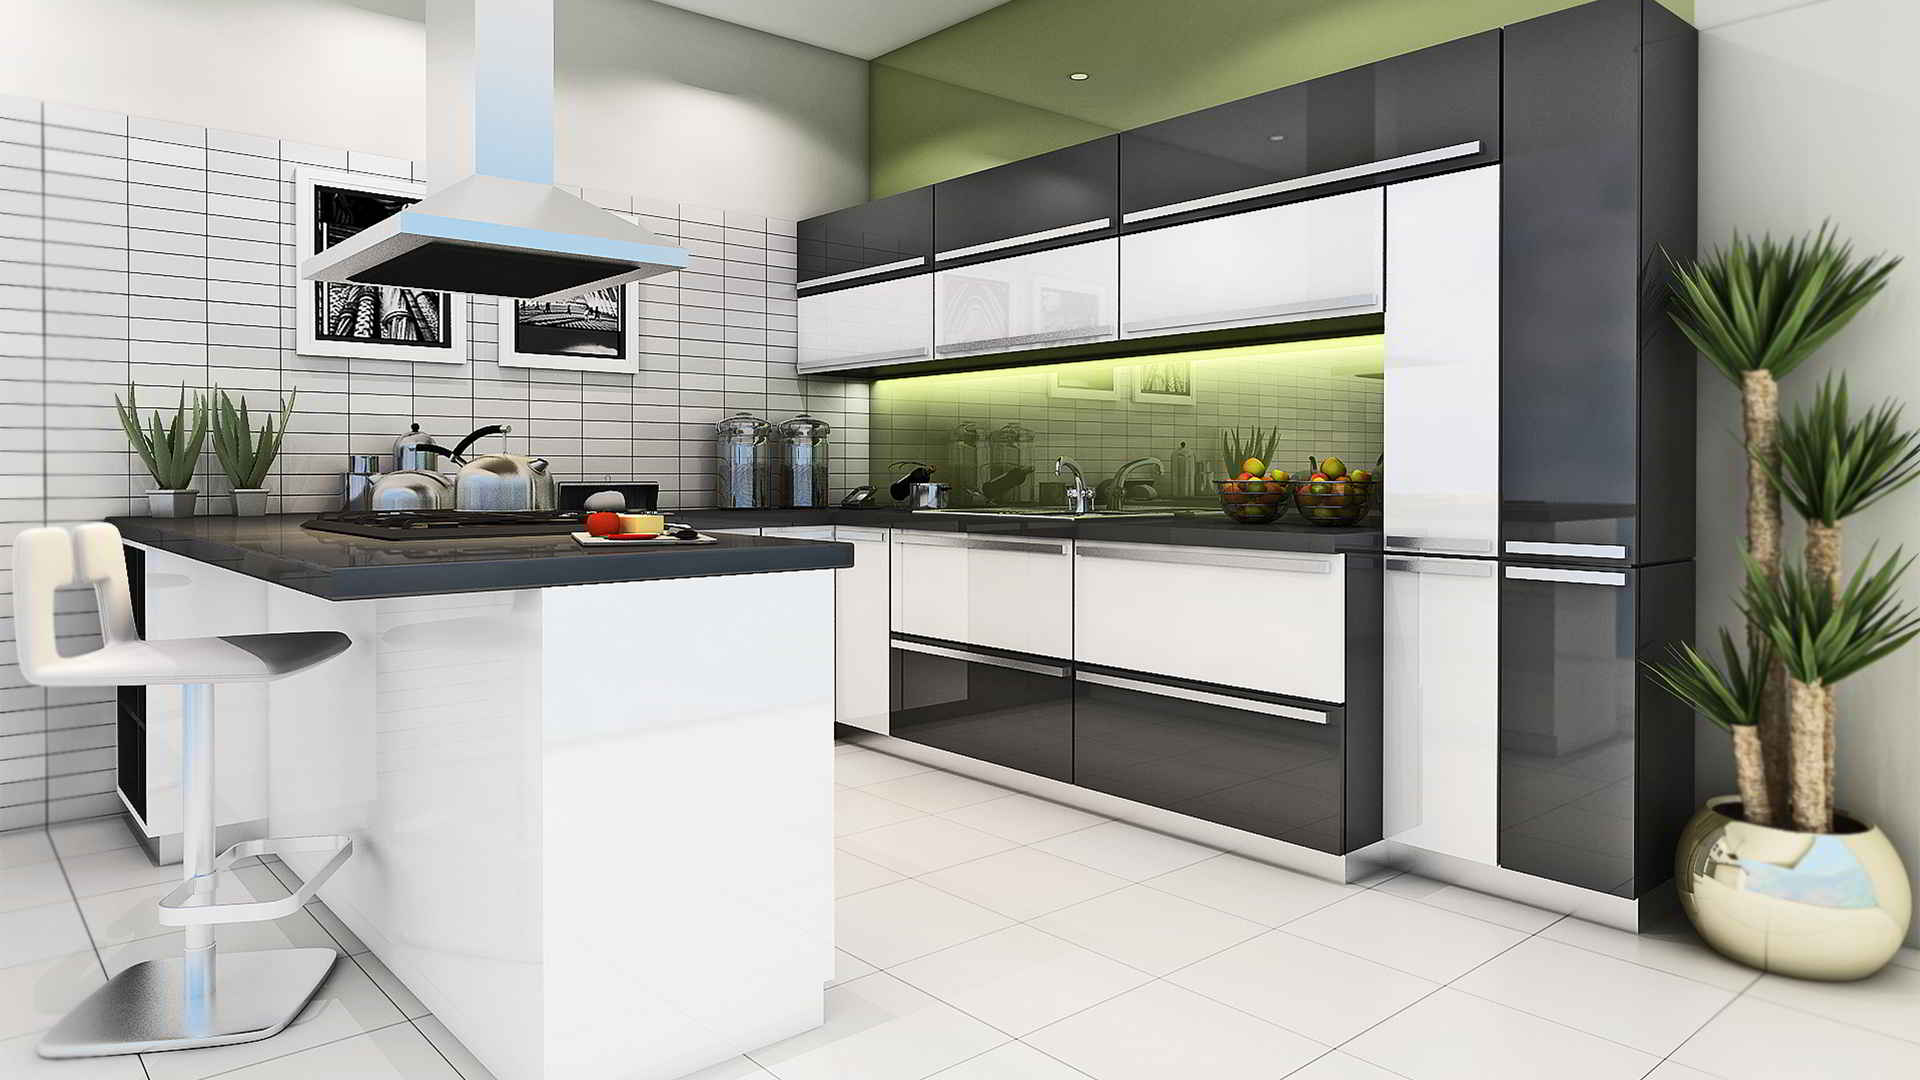 25+ Latest Design Ideas Of Modular Kitchen Pictures , Images  Catalogue